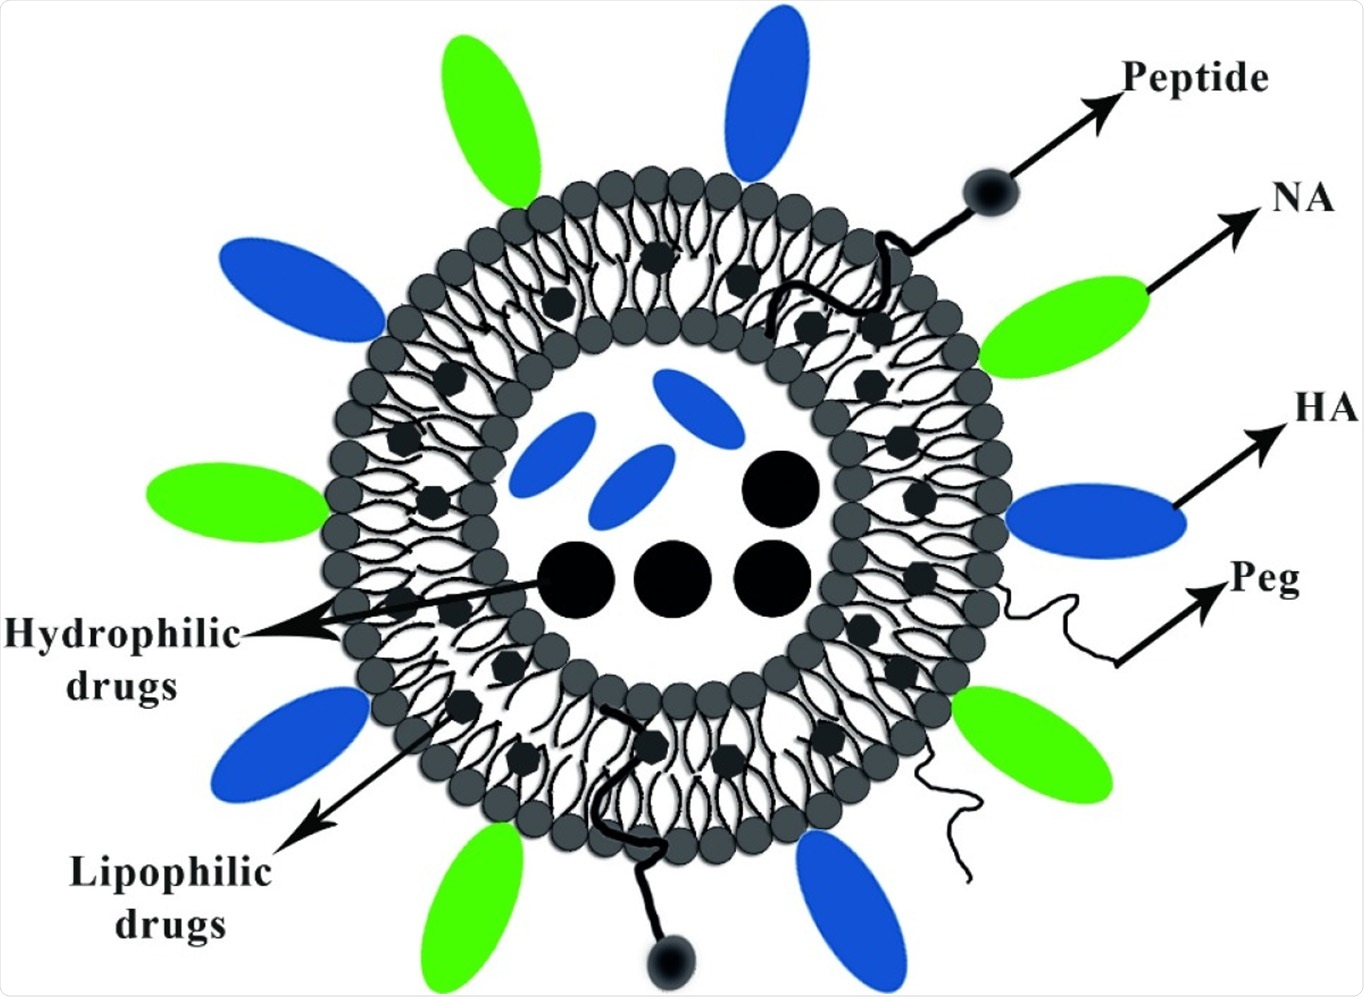 Shows the schematic illustration of the virosome particle. Virosome endowed adjuvant properties and functioning as a carrier for delivering several bioactive compounds, including lipophilic and hydrophilic drugs, peptides, and polymers.